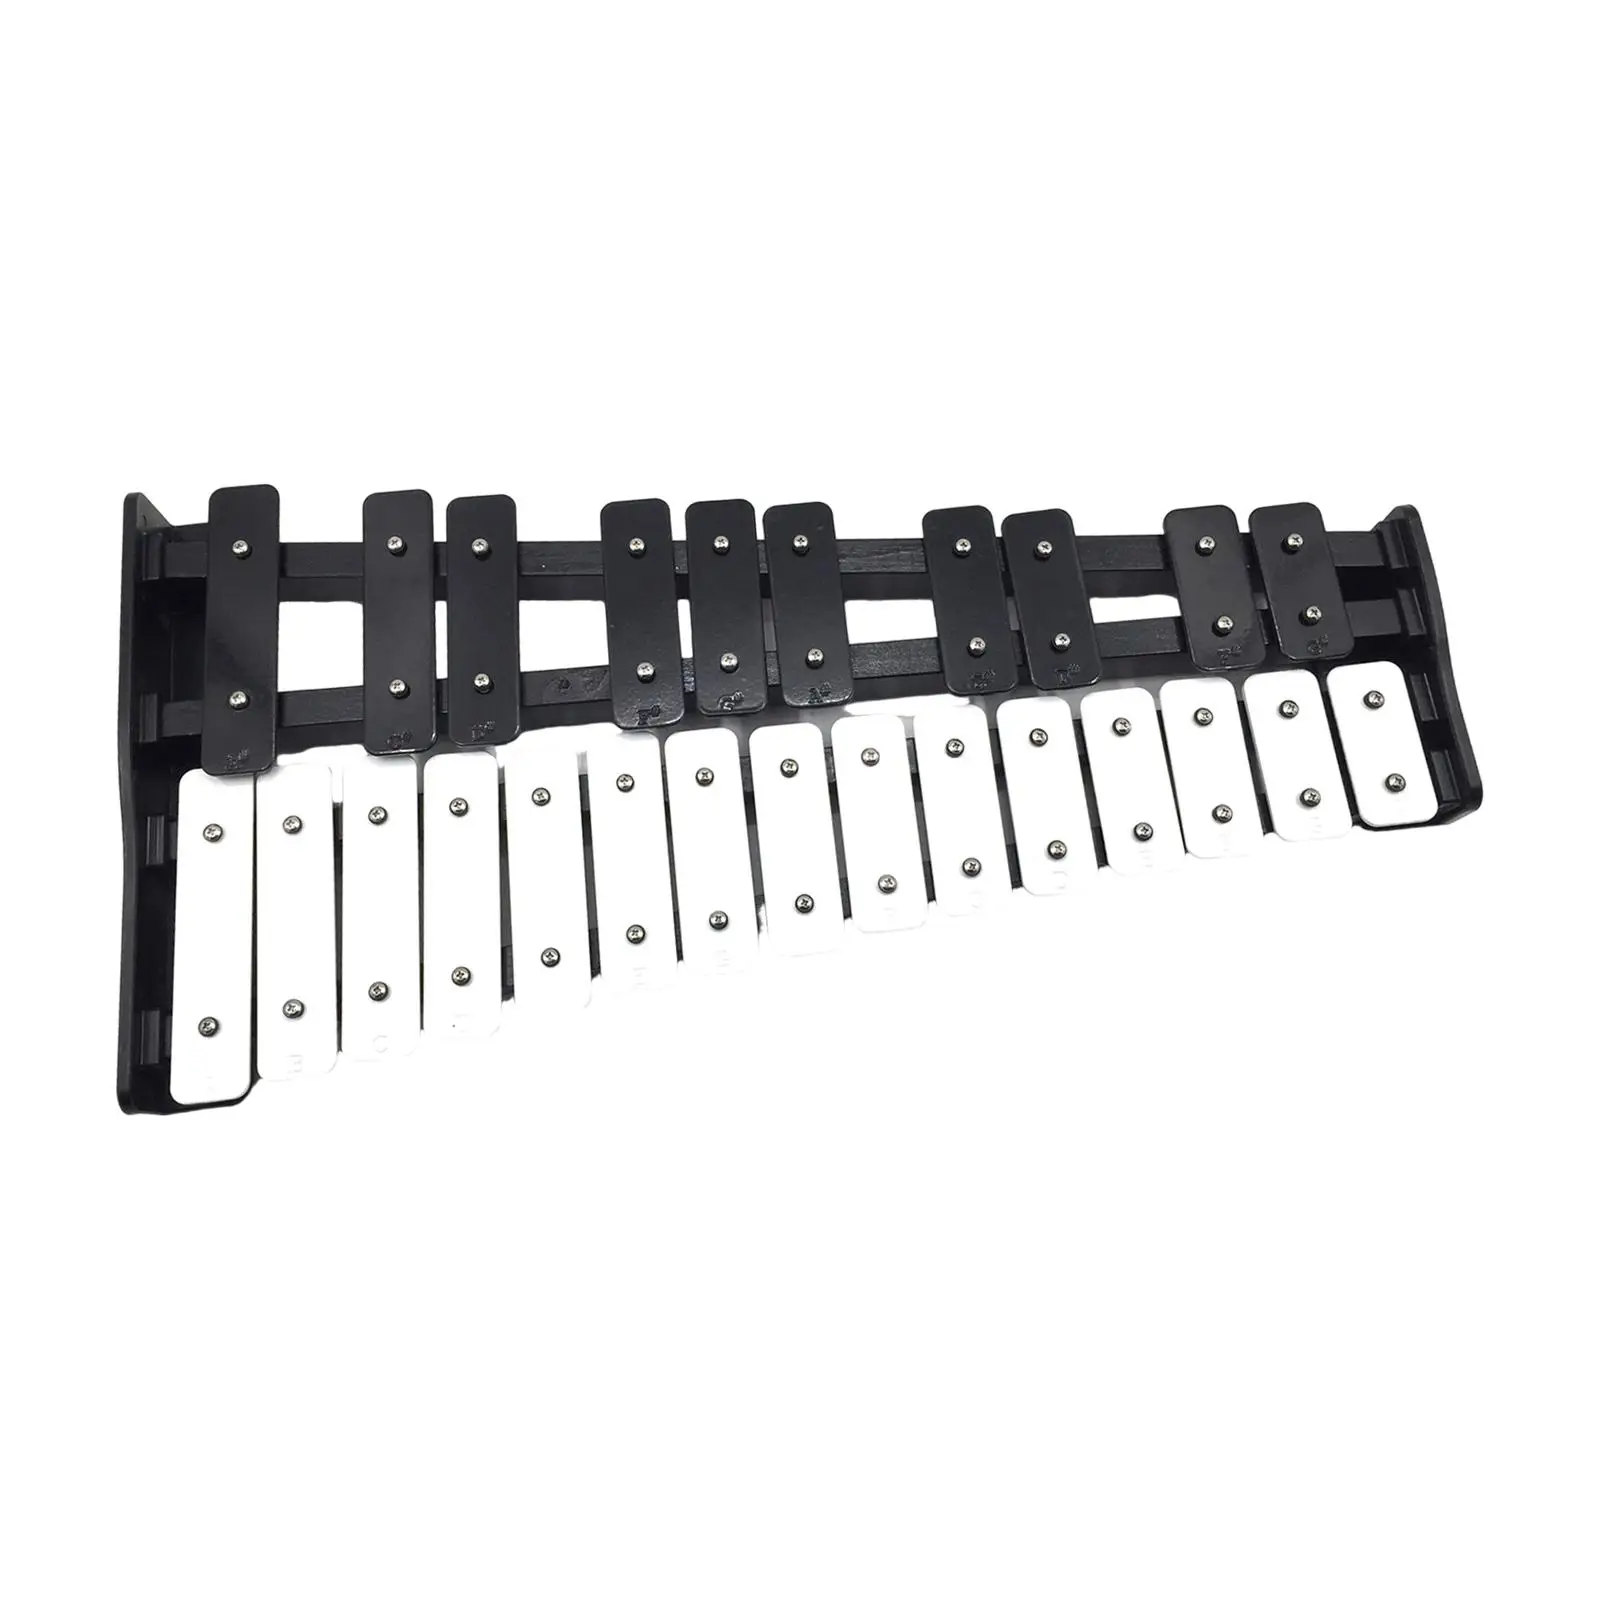 Xylophone Gifts Portable for Beginners Compact 25 Key Glockenspiel Musical Instrument Musical Educational Tuned Glockenspiel